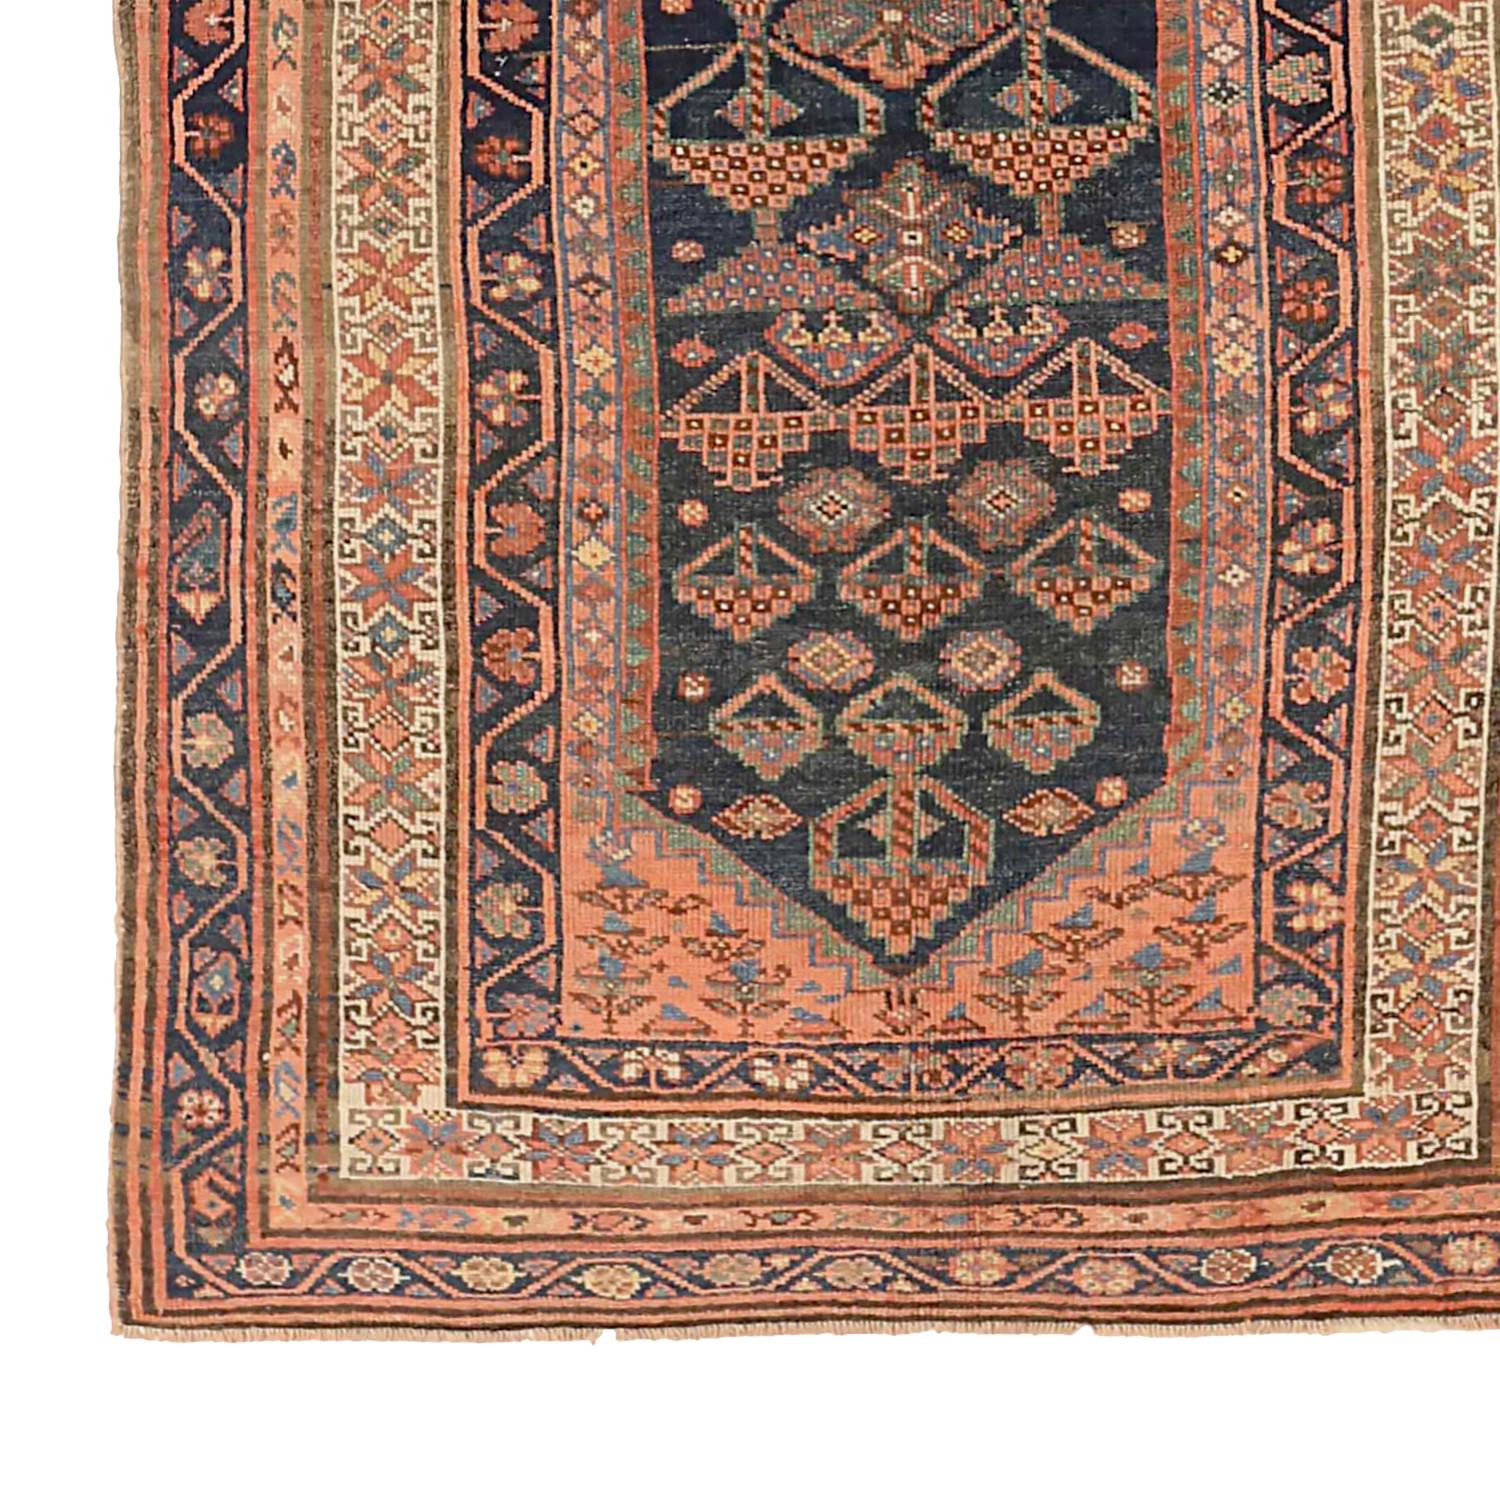 Other Antique Persian Area Rug Lori Design For Sale